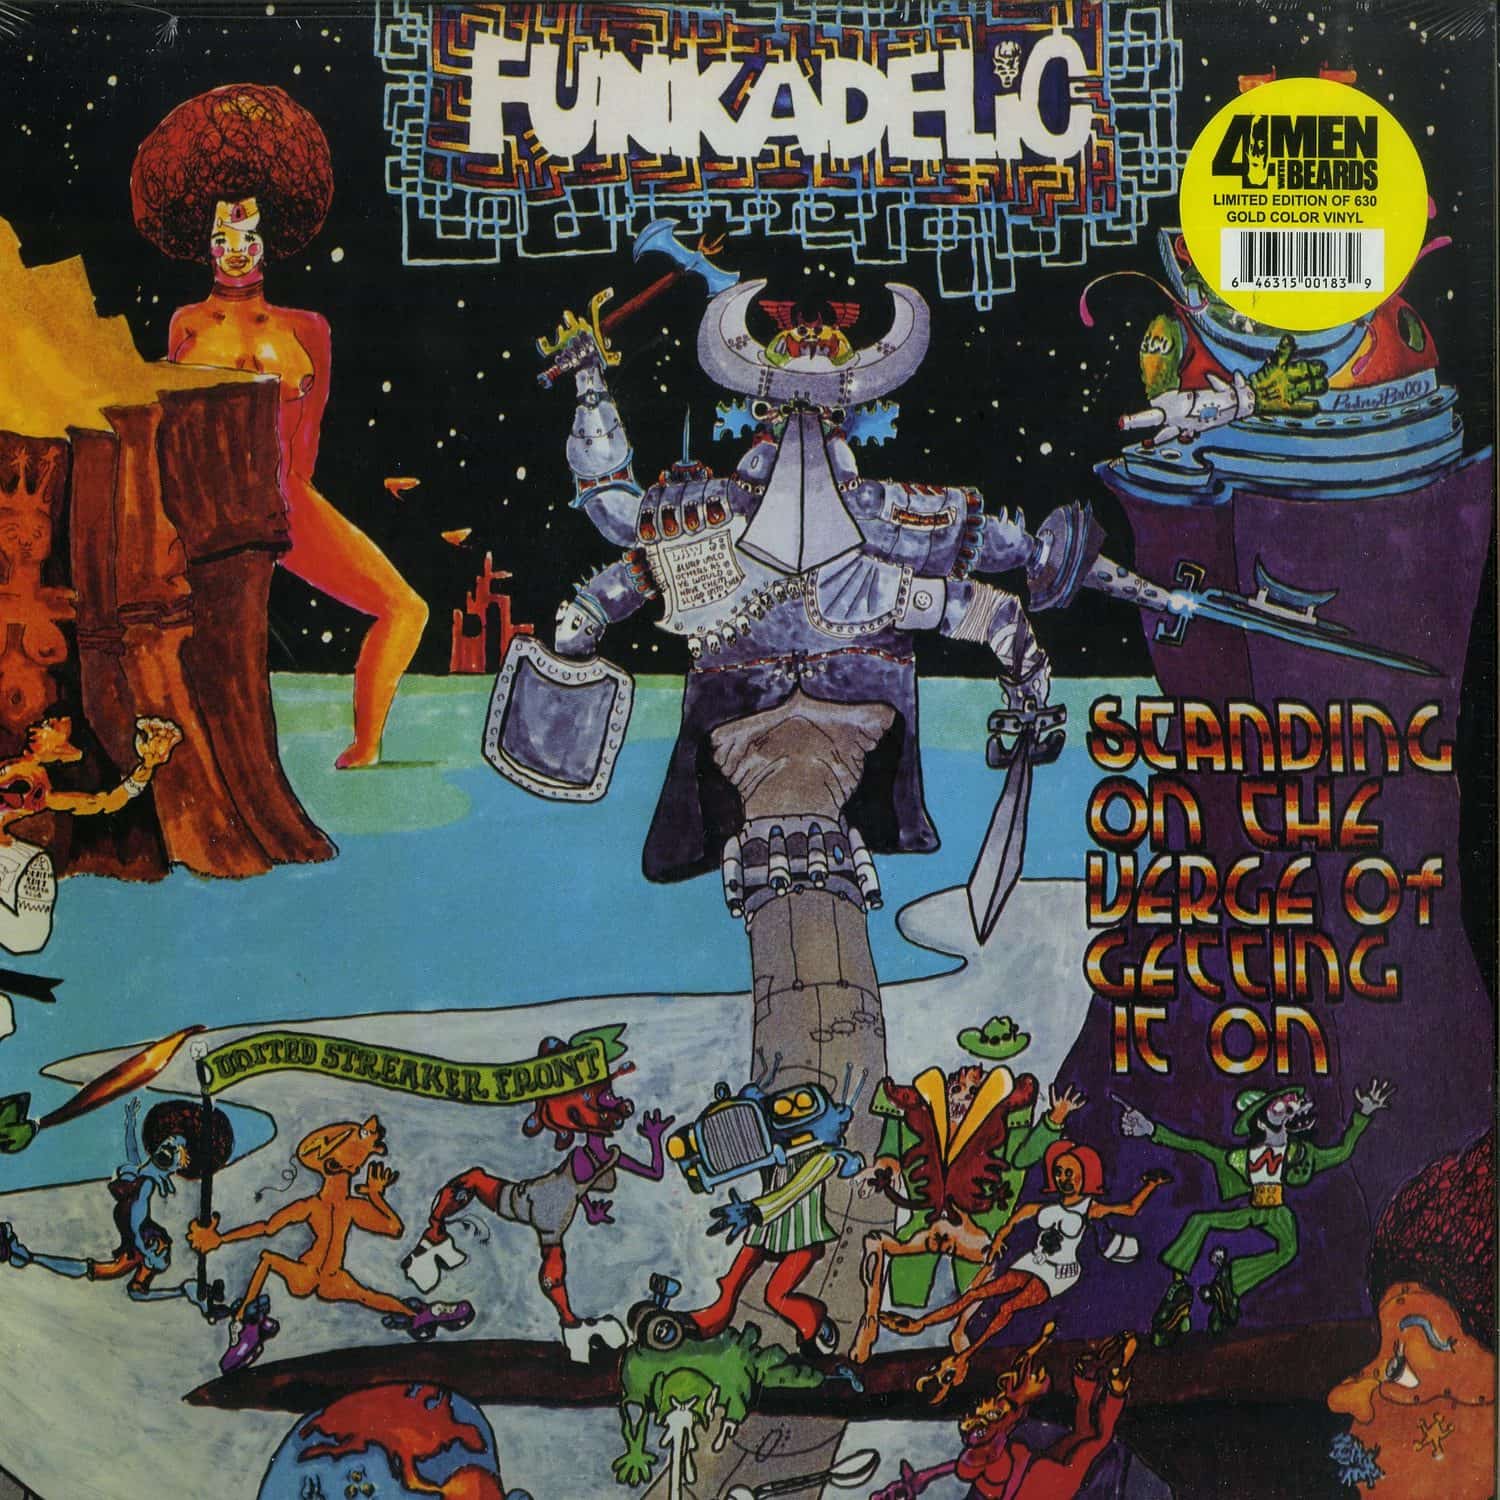 Funkadelic - STANDING ON THE VERGE OF GETTING ON 